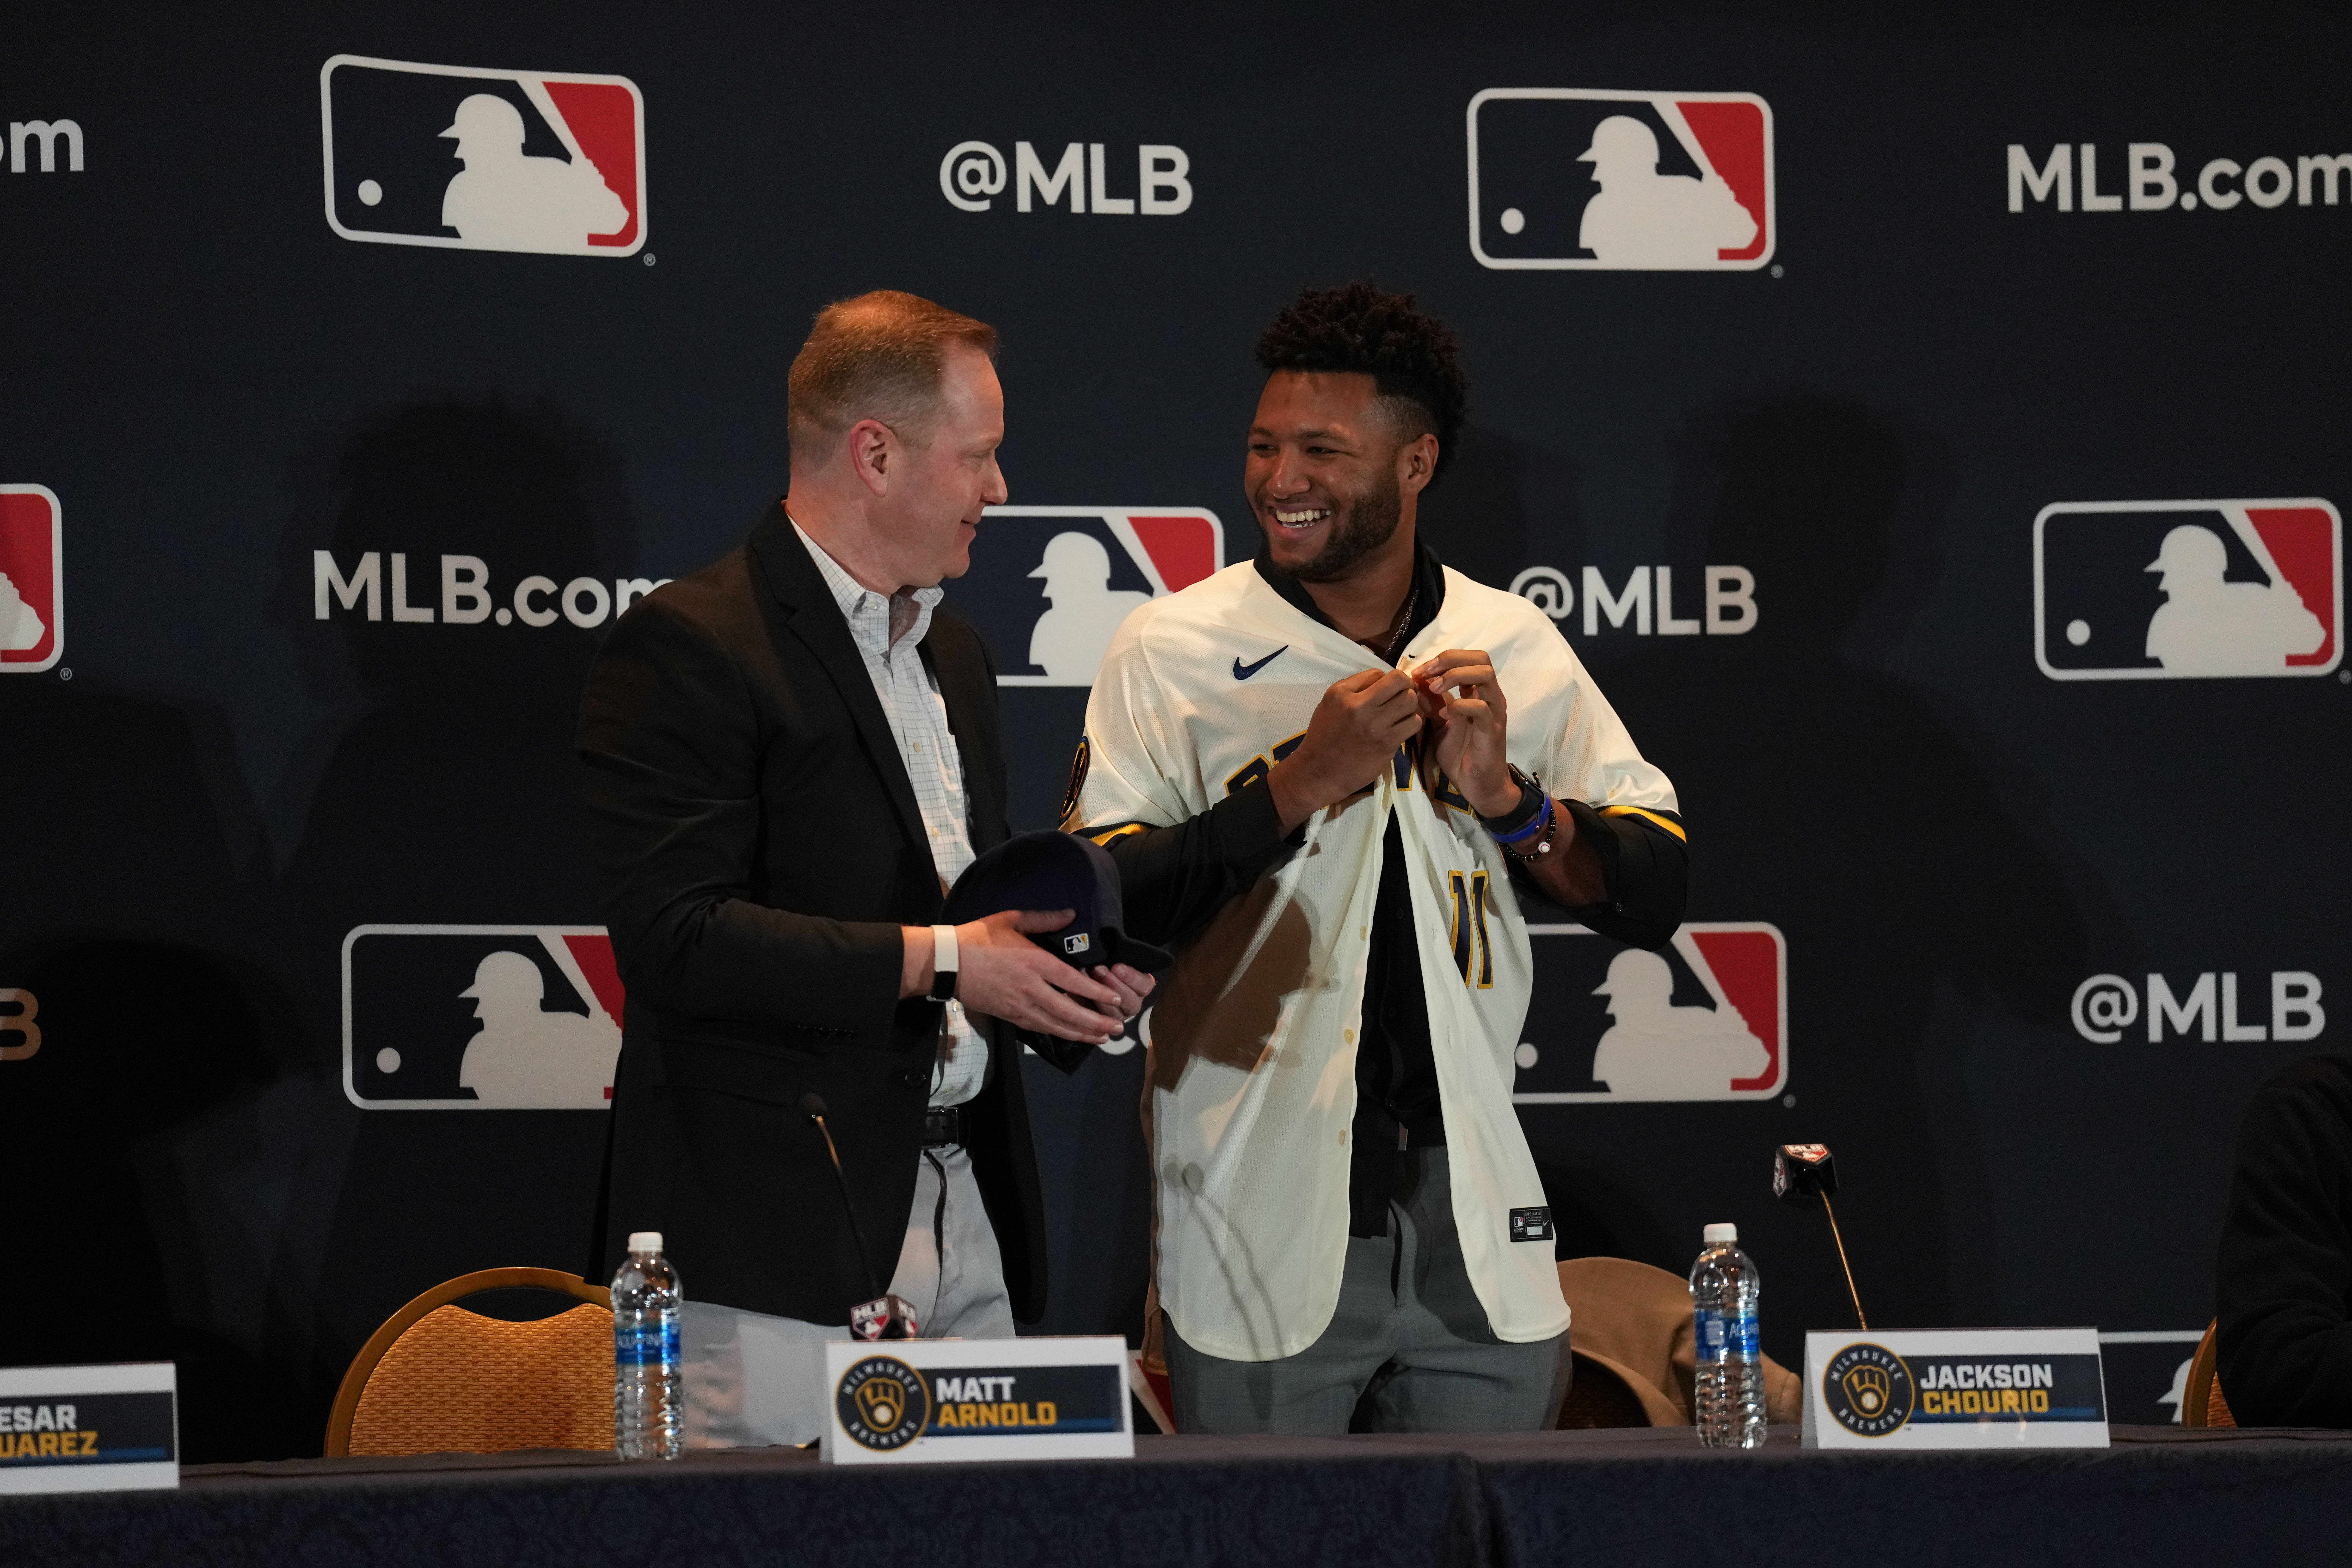 Jackson Chourio puts on a Brewers jersey smiling at GM Matt Arnold while the two stand in front of a MLB backdrop